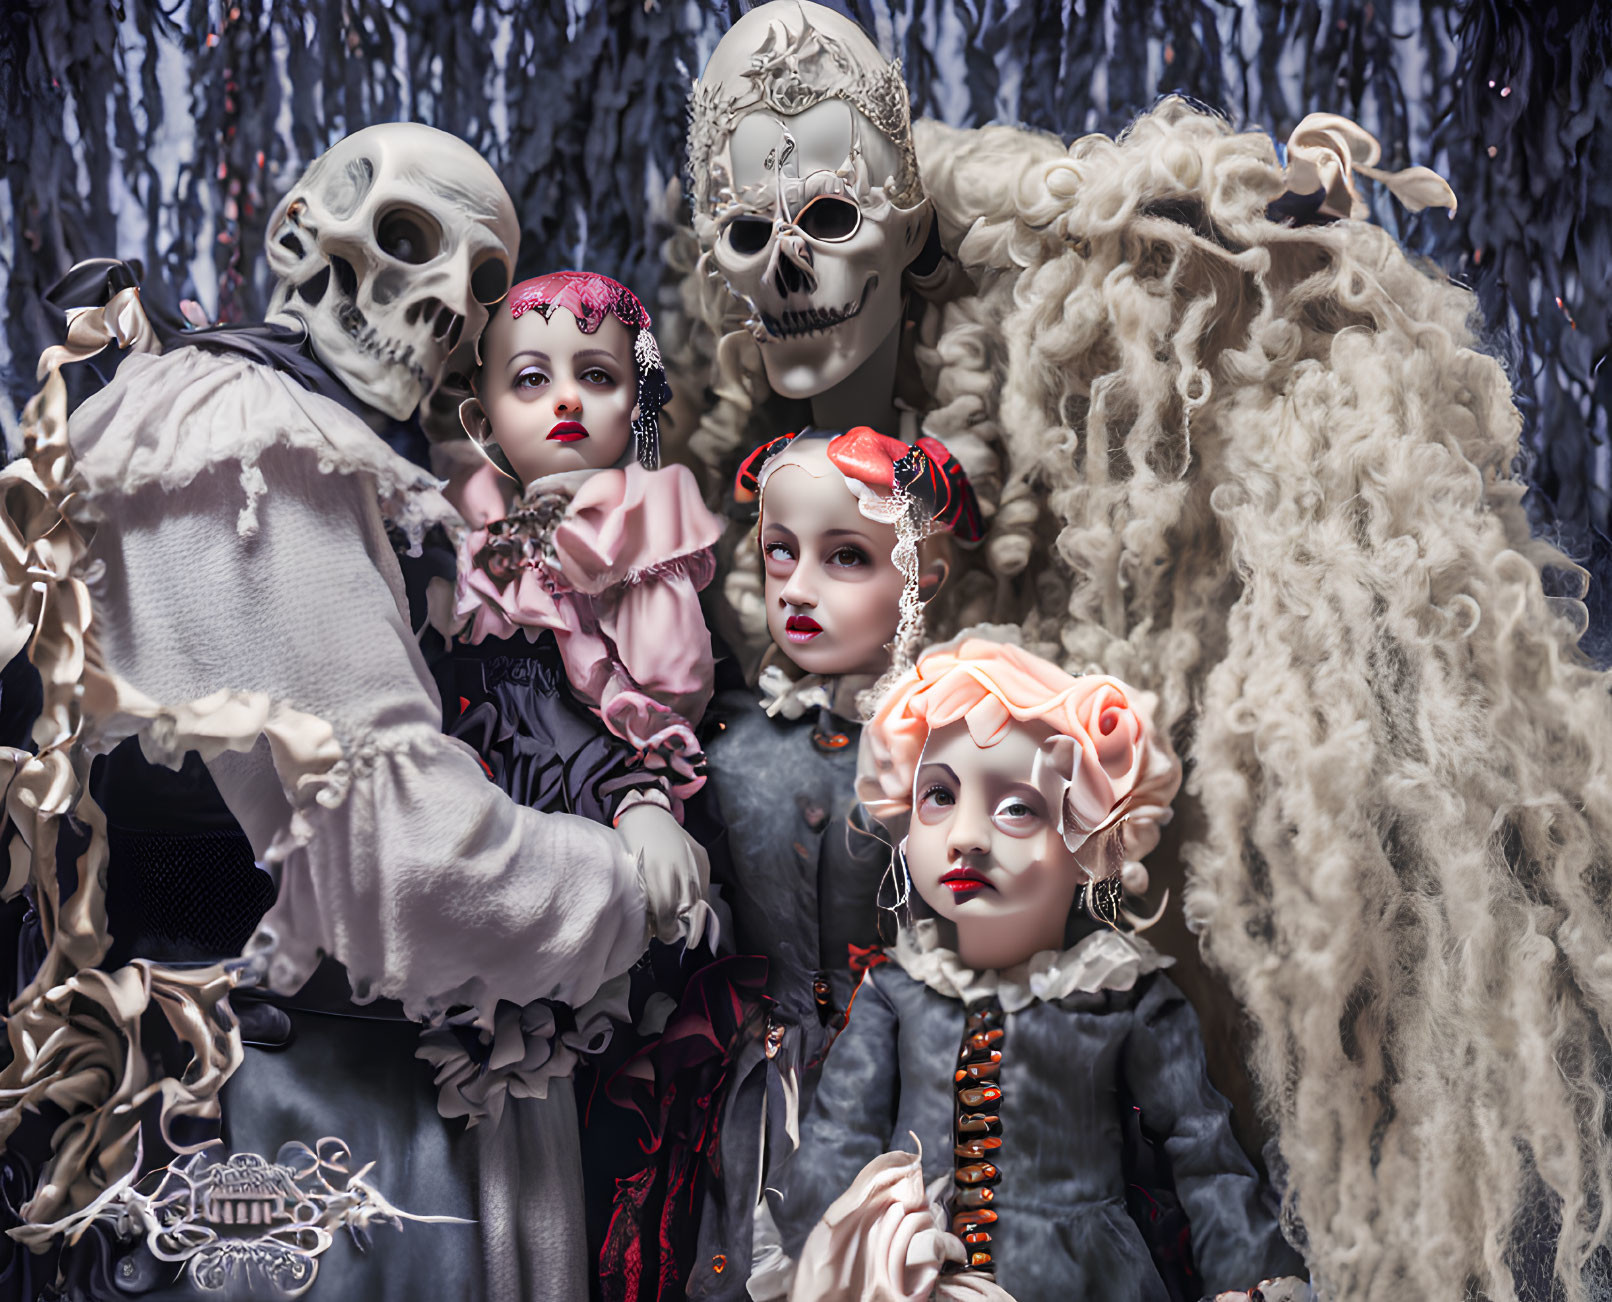 Five ornate dolls with skull and vintage-style makeup in intricate costumes on textured background